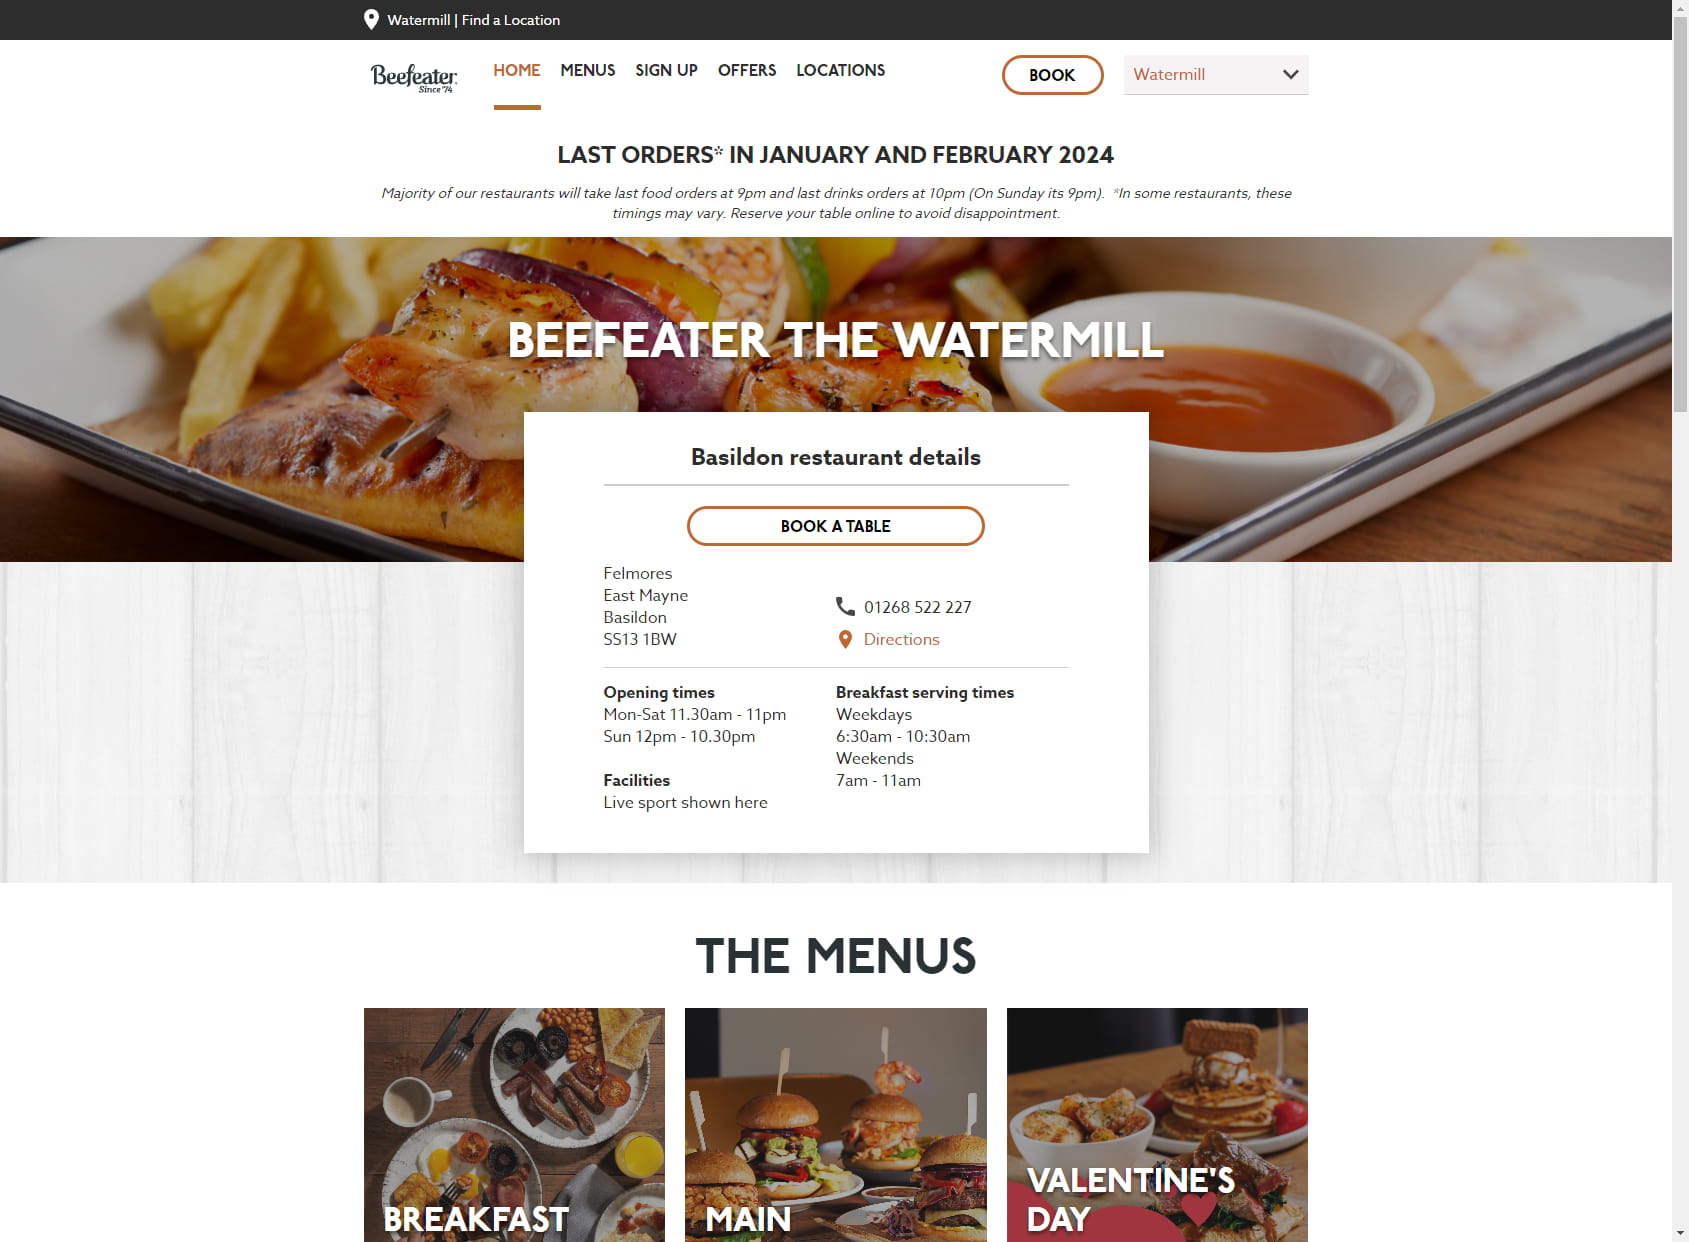 The Watermill Beefeater